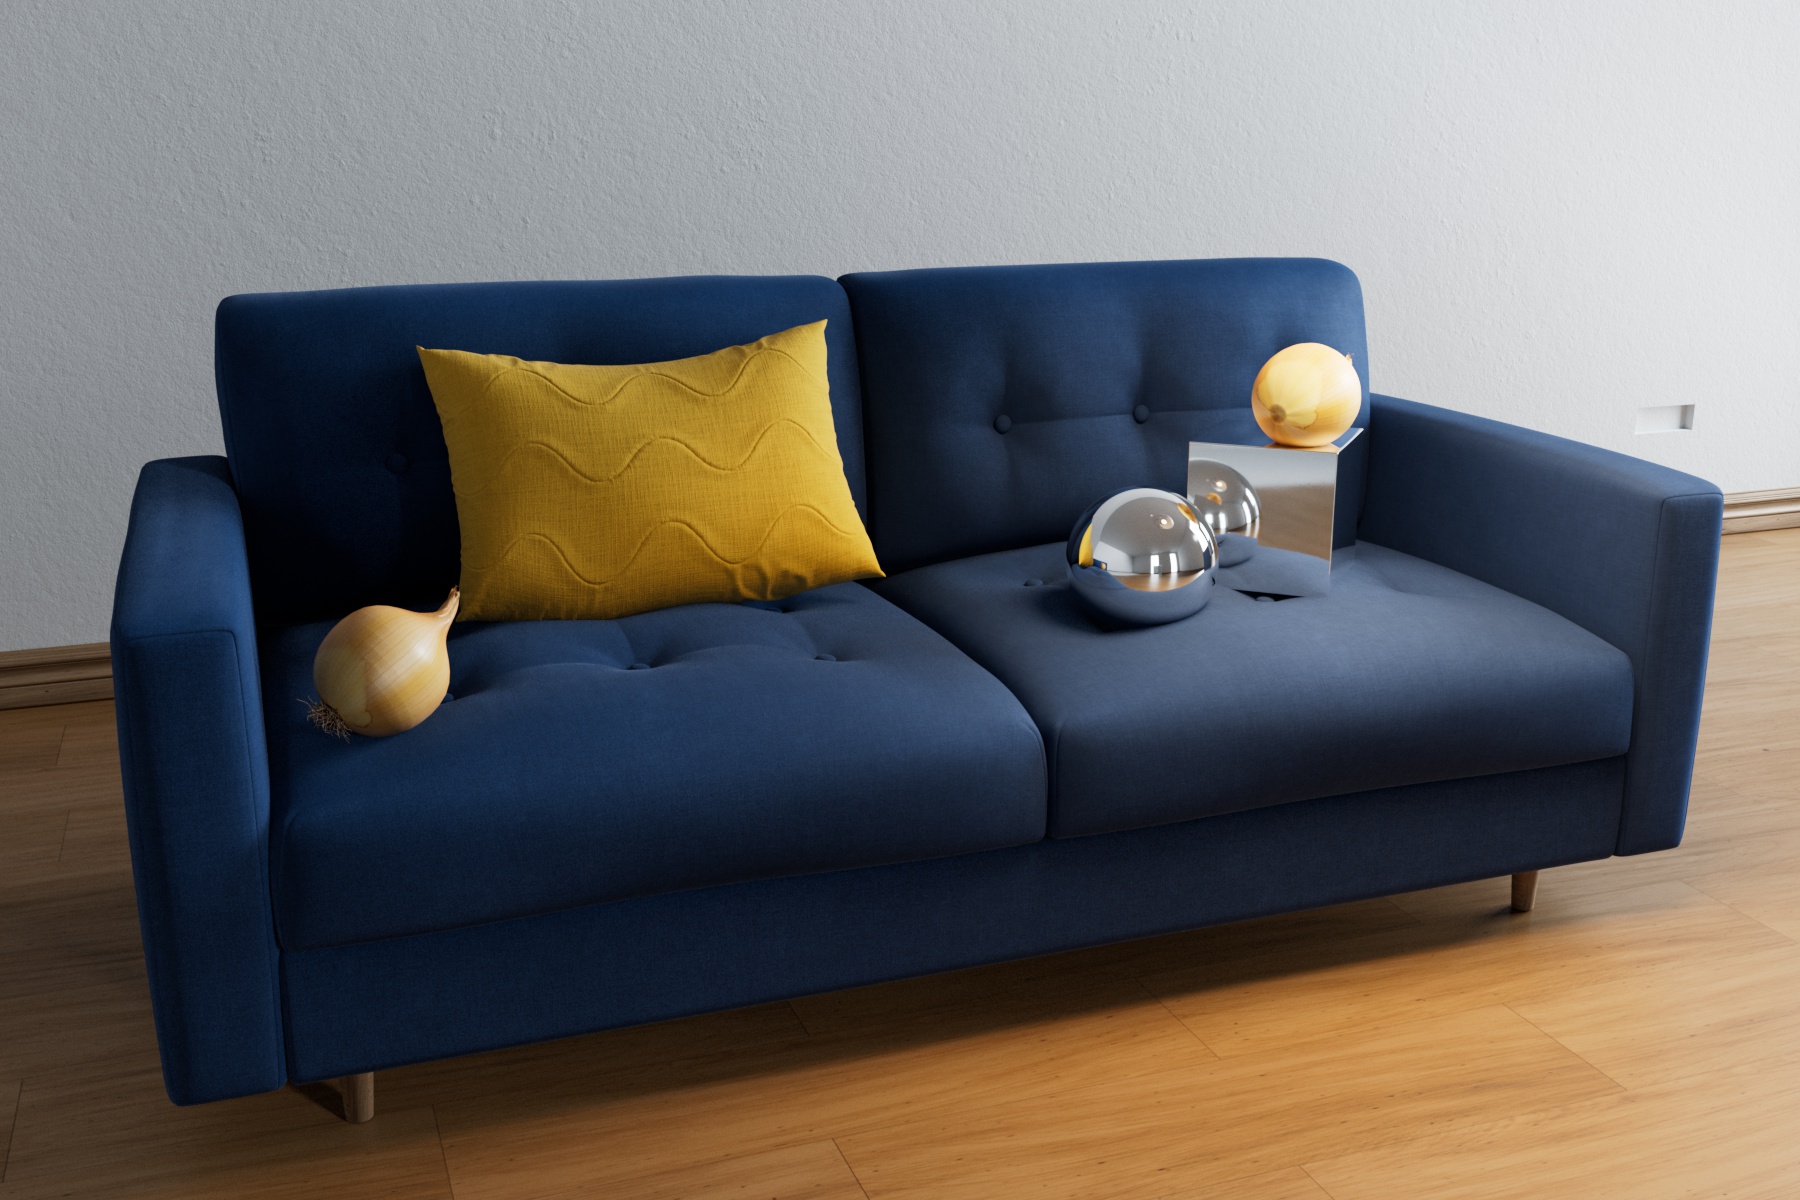 Large onions on a sofa